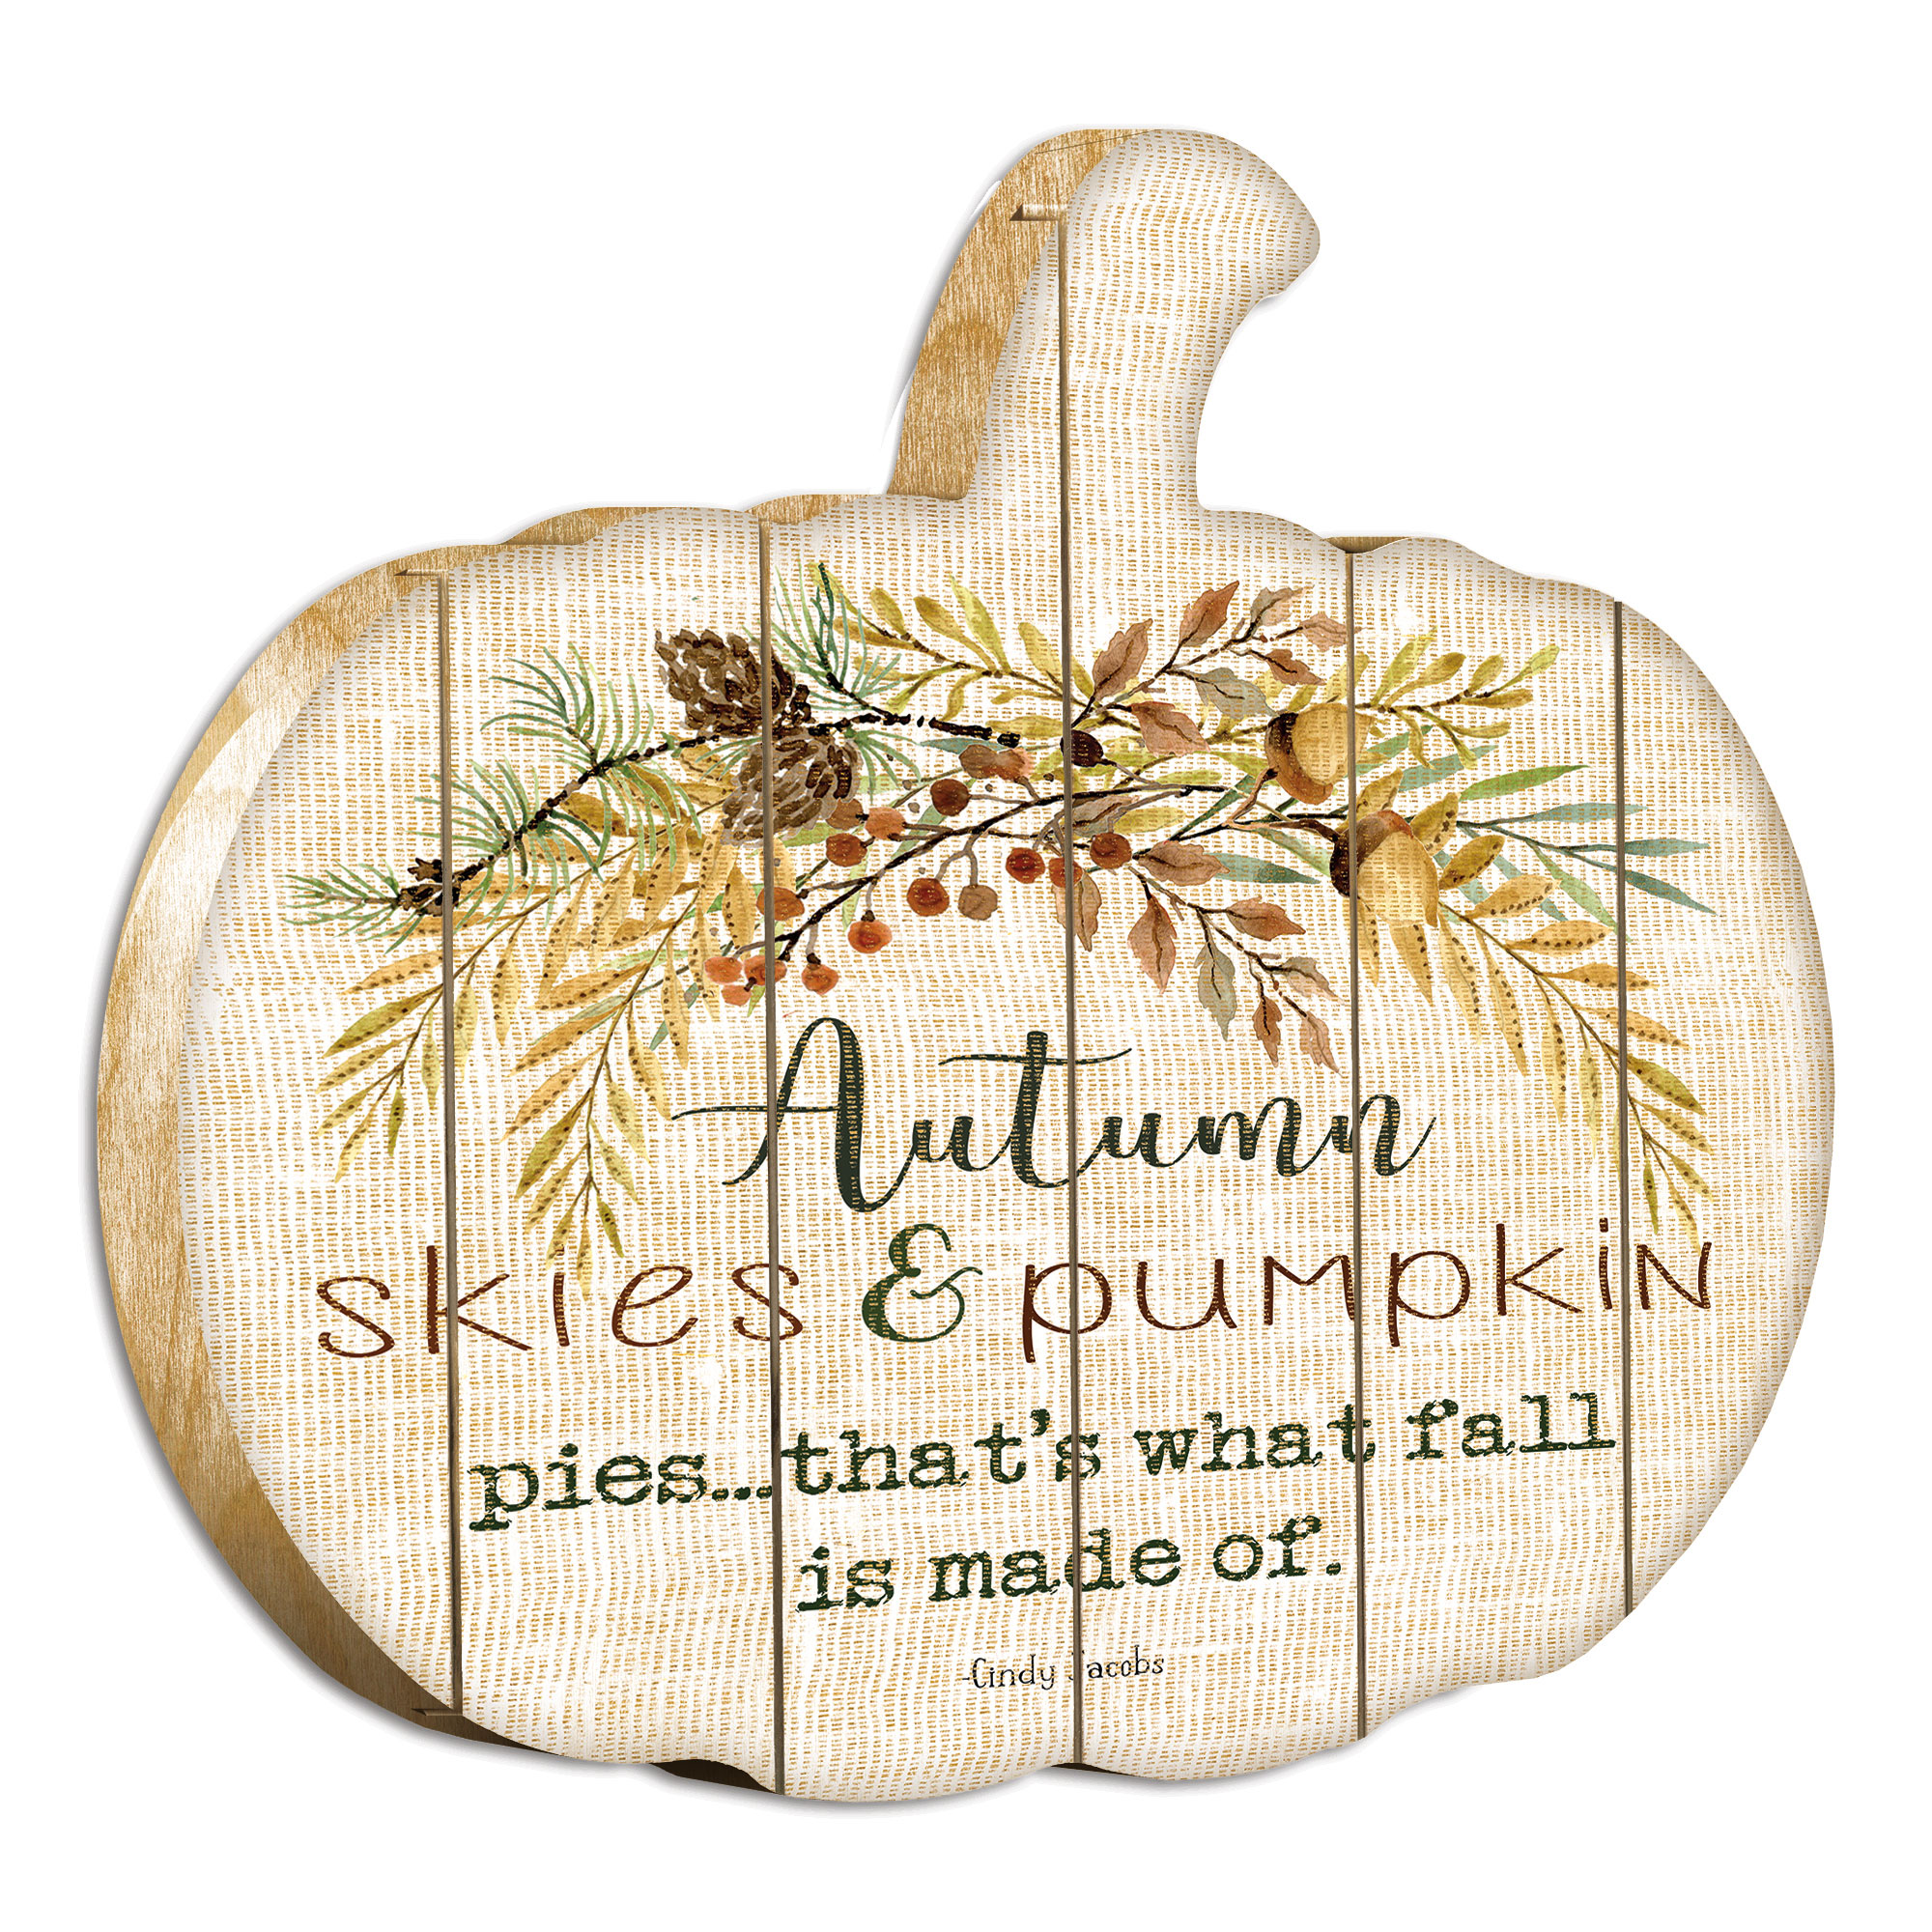 "Autumn Skies" By Artisan Cindy Jacobs Printed on Wooden Pumpkin Wall Art